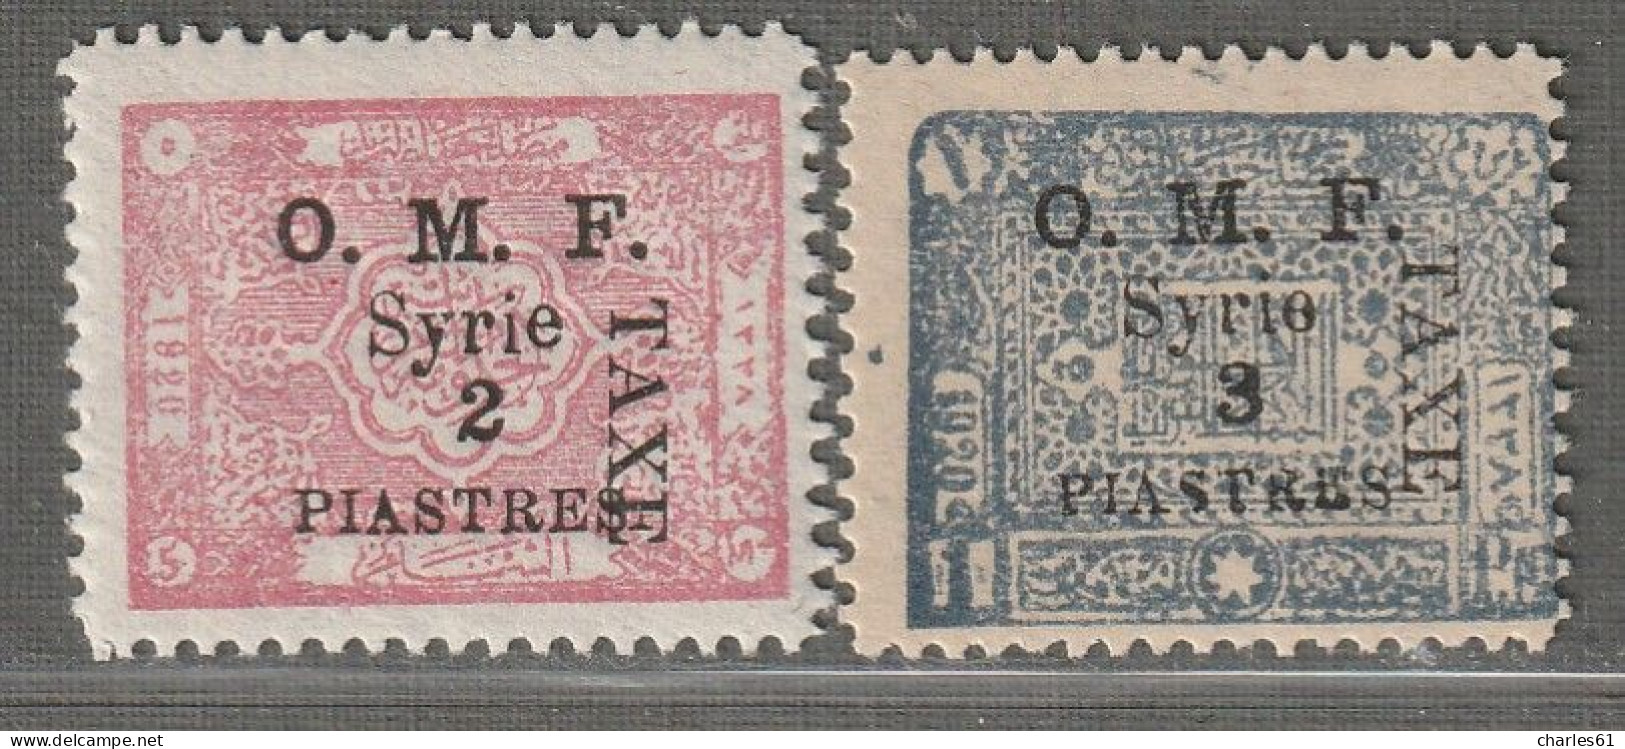 SYRIE - TAXE N°15+16 ** (1921) - Postage Due